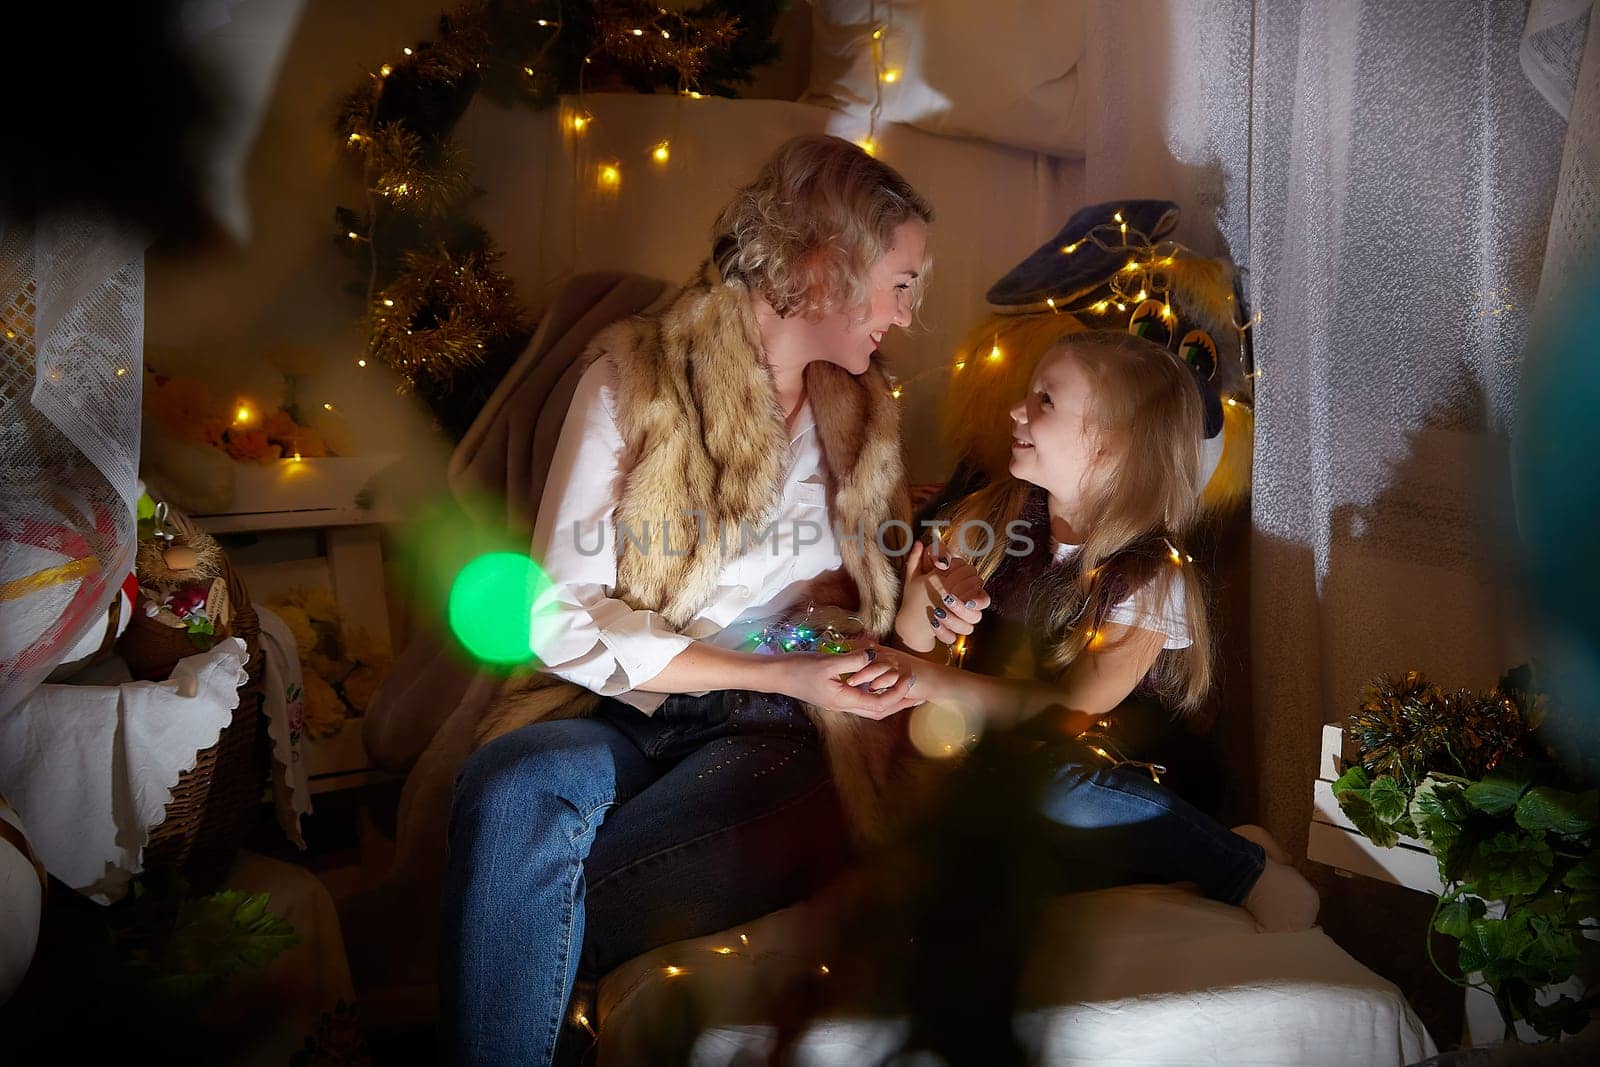 Cute mother and daughter in a room with Christmas garlands. The tradition of decorating the house and dressing up for the holidays. Gifts for family. Happy childhood and motherhood